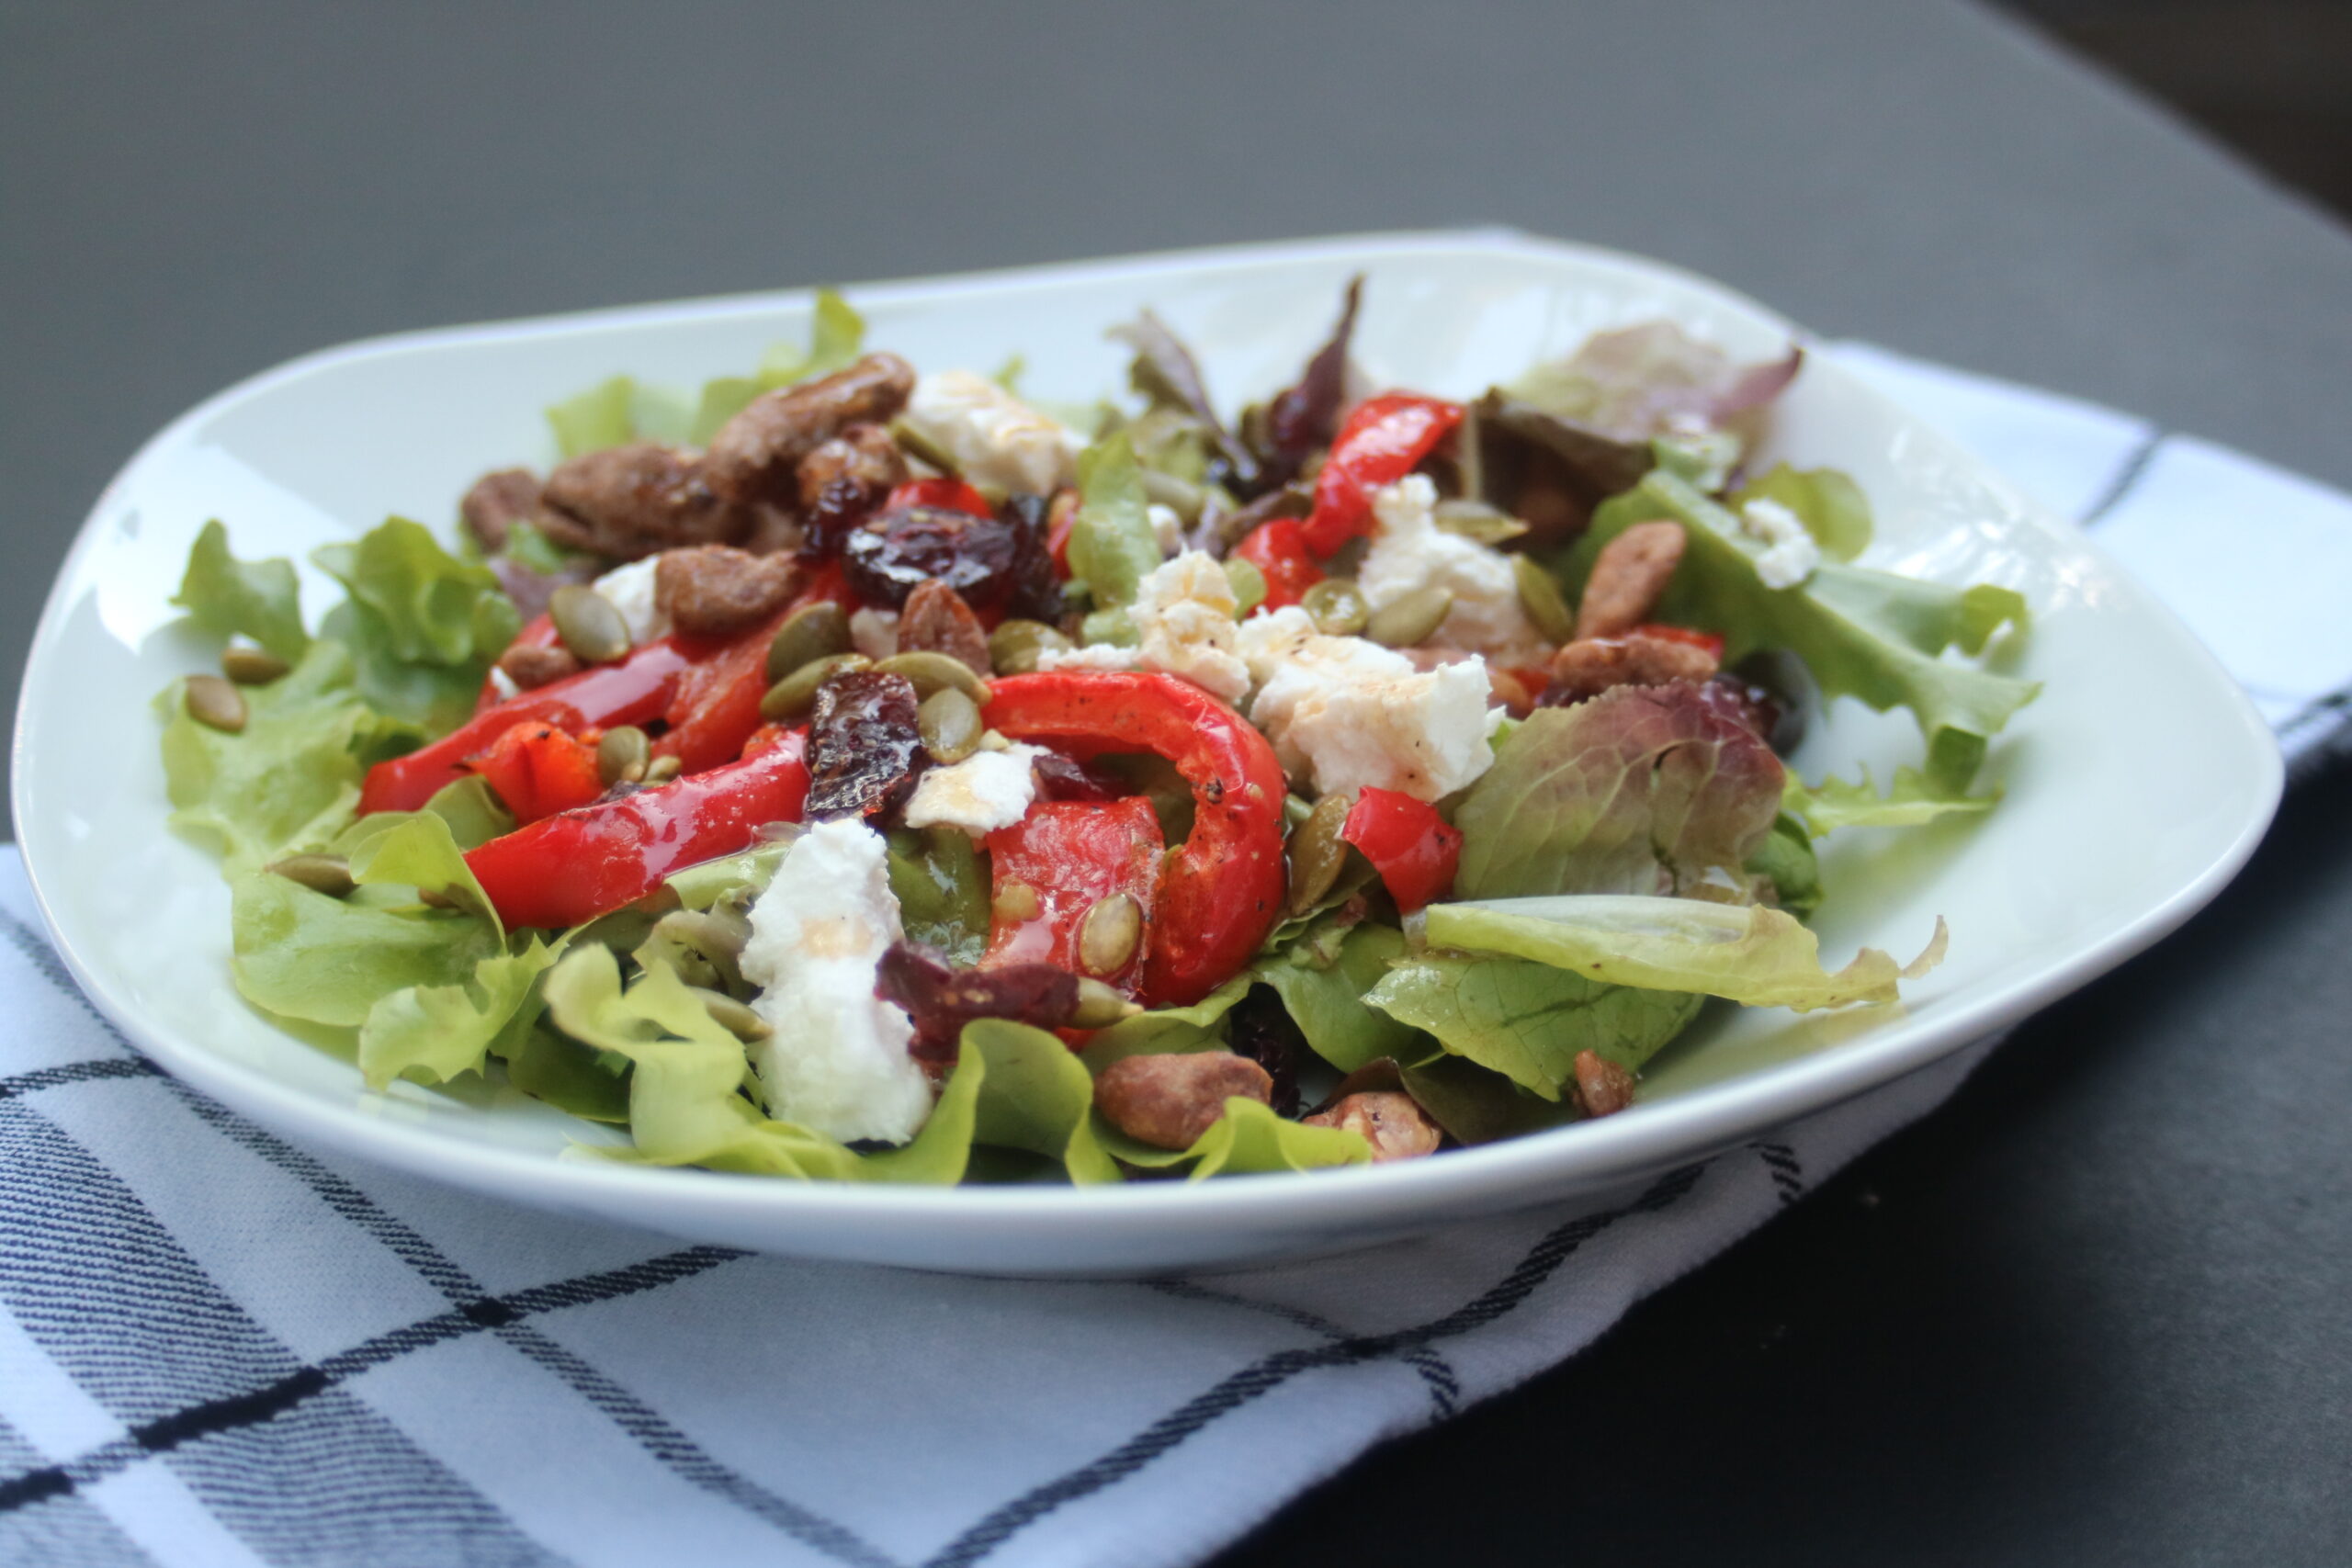 Spring Mix Salad with Roasted Red Peppers + Goat Cheese + Nuts potsandplanes.com